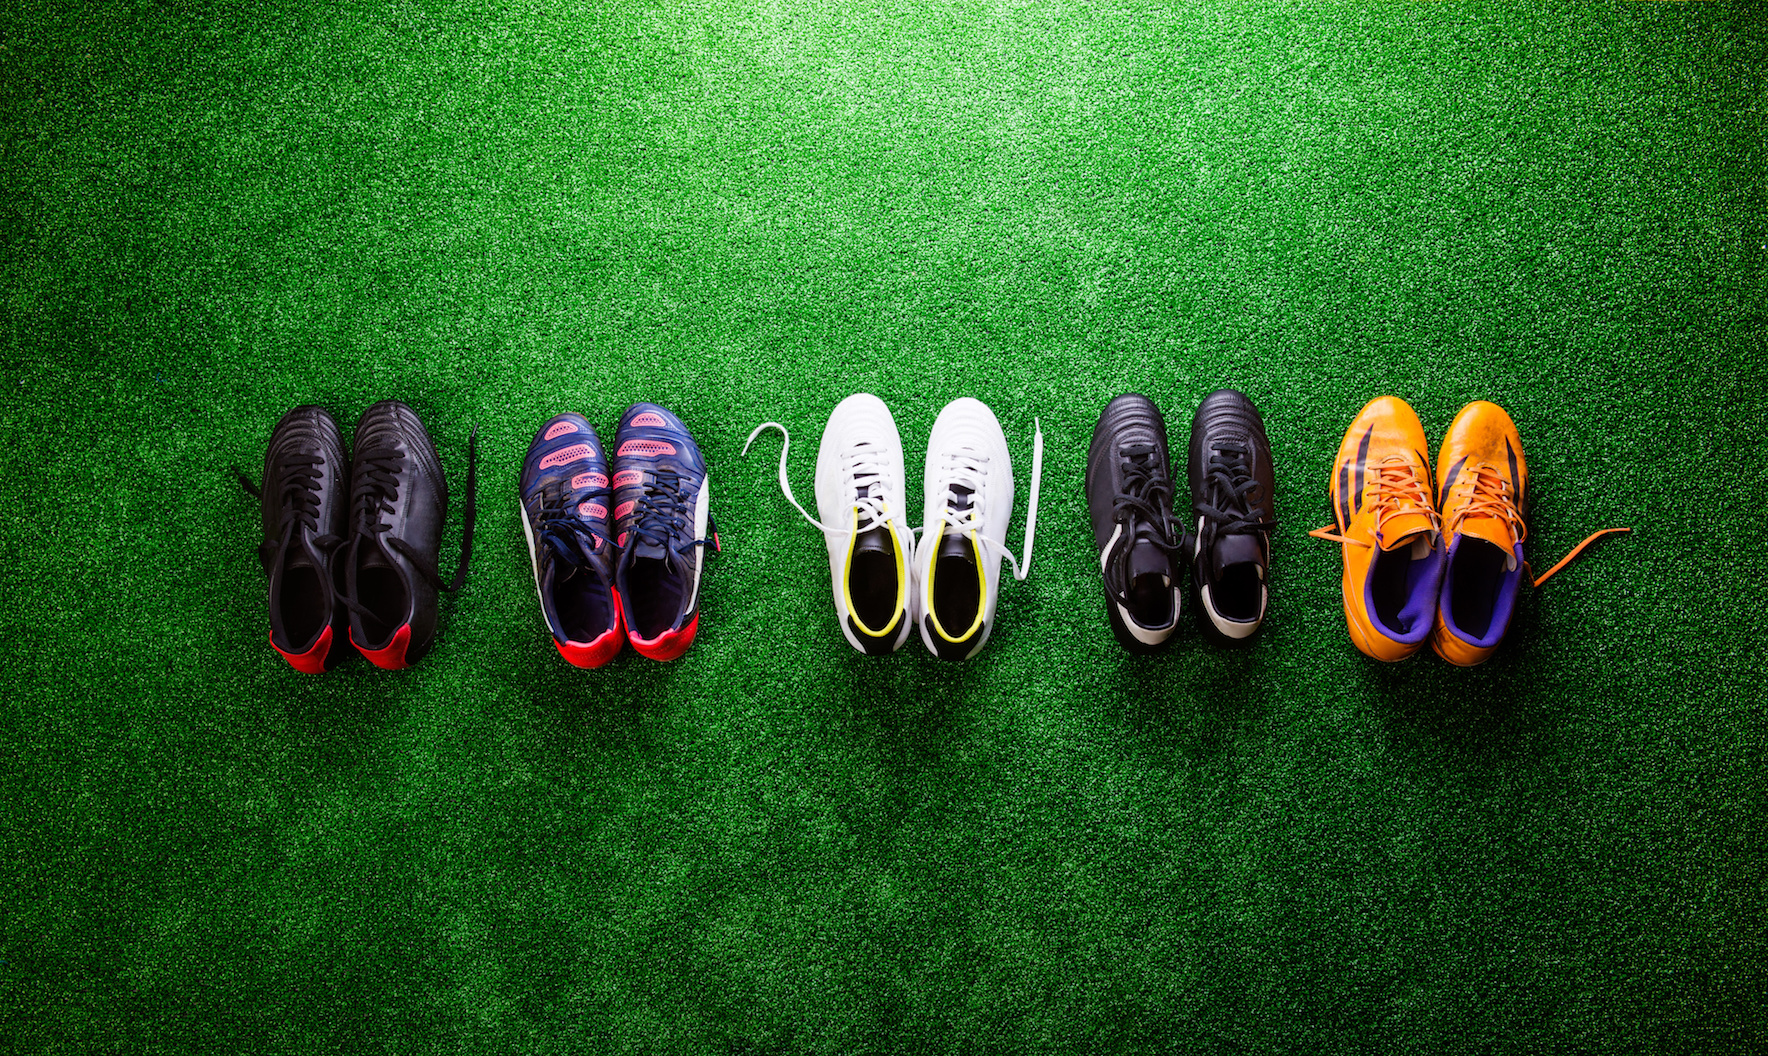 Football boots and trainers on grass